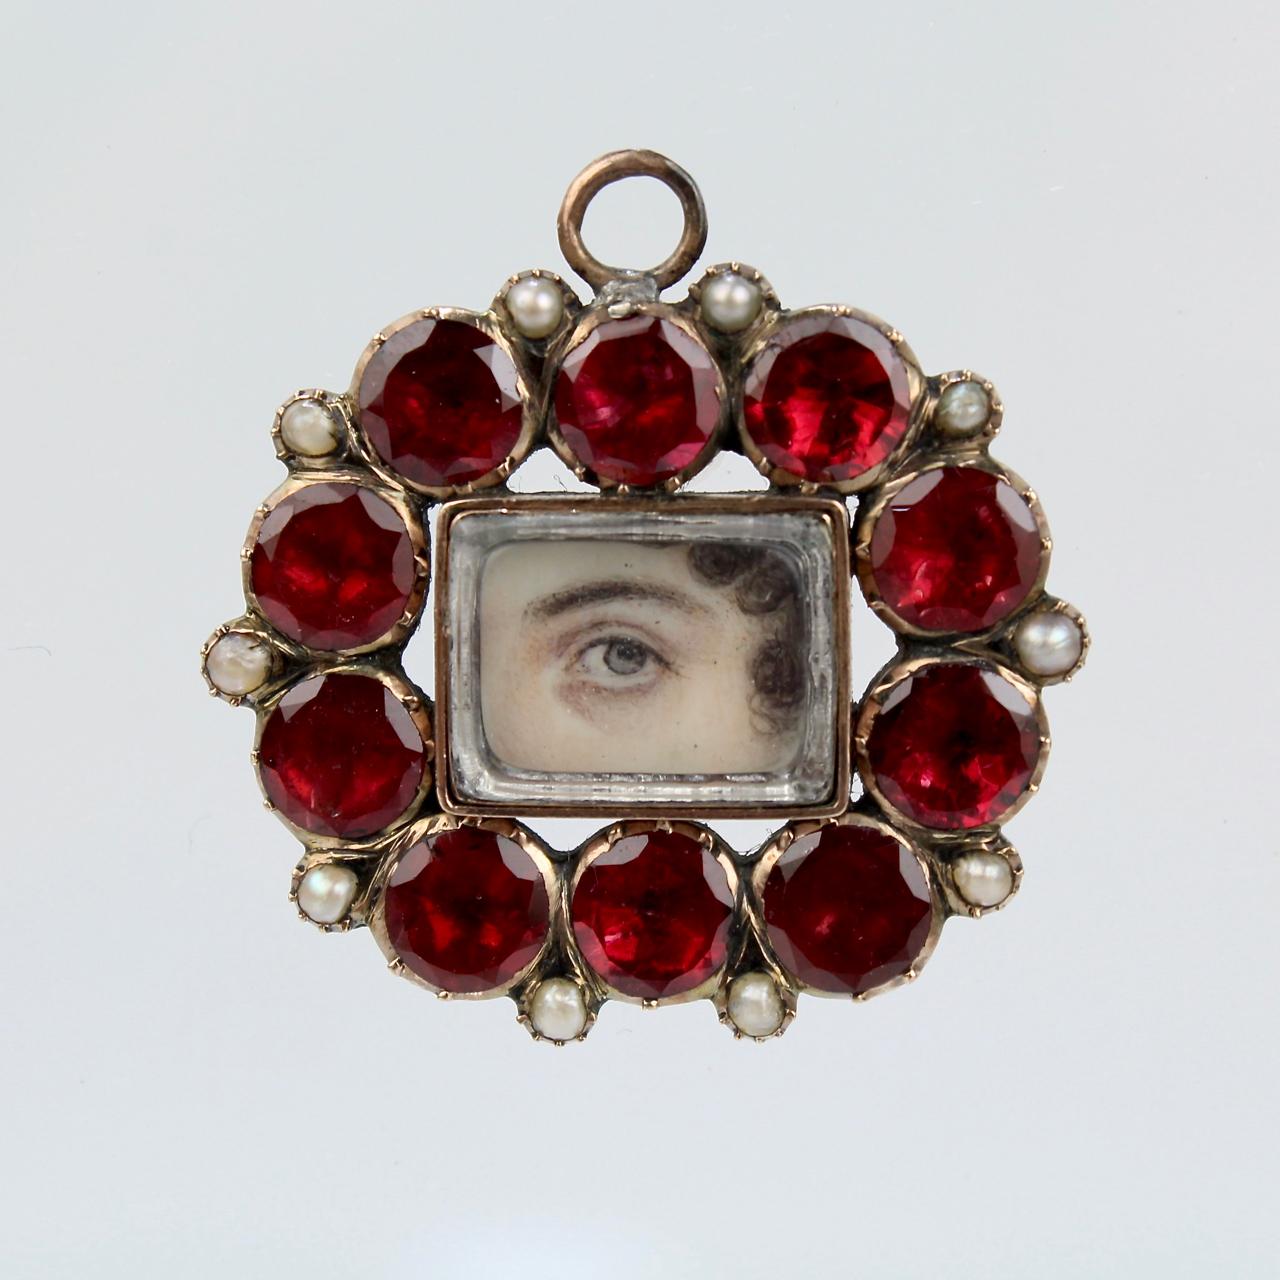 A very fine antique Georgian lover's eye pendant.

With a finely hand-painted lover's eye portrait surrounded by garnets and seed pearls in a low karat gold setting. The top is set with a loop for a jump ring to suspend it as a pendant.

In the